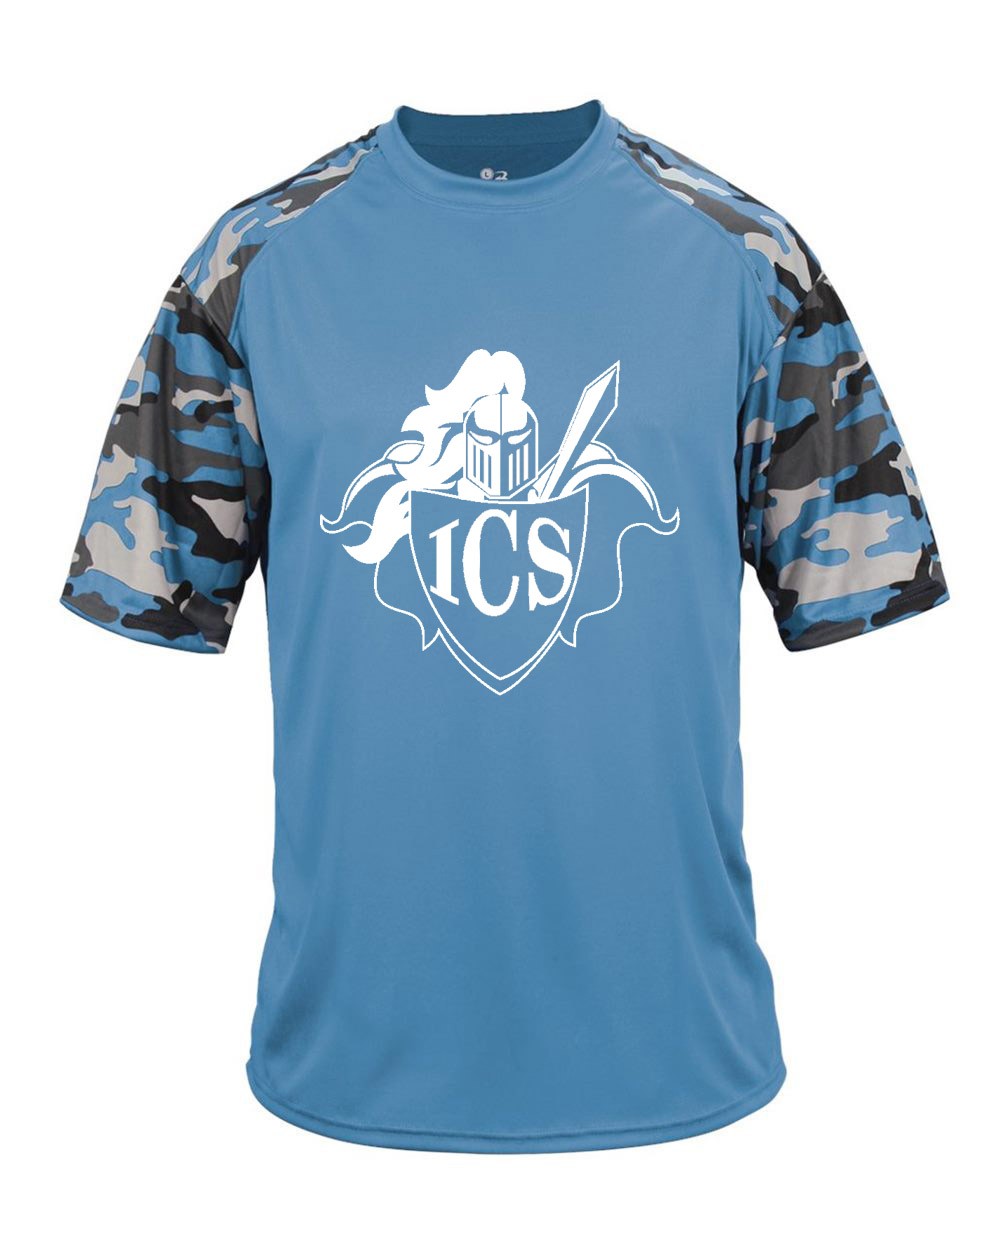 ICS Spirit S/S Camo T-Shirt w/ White Logo #11- Please Allow 3-4 Weeks for Delivery